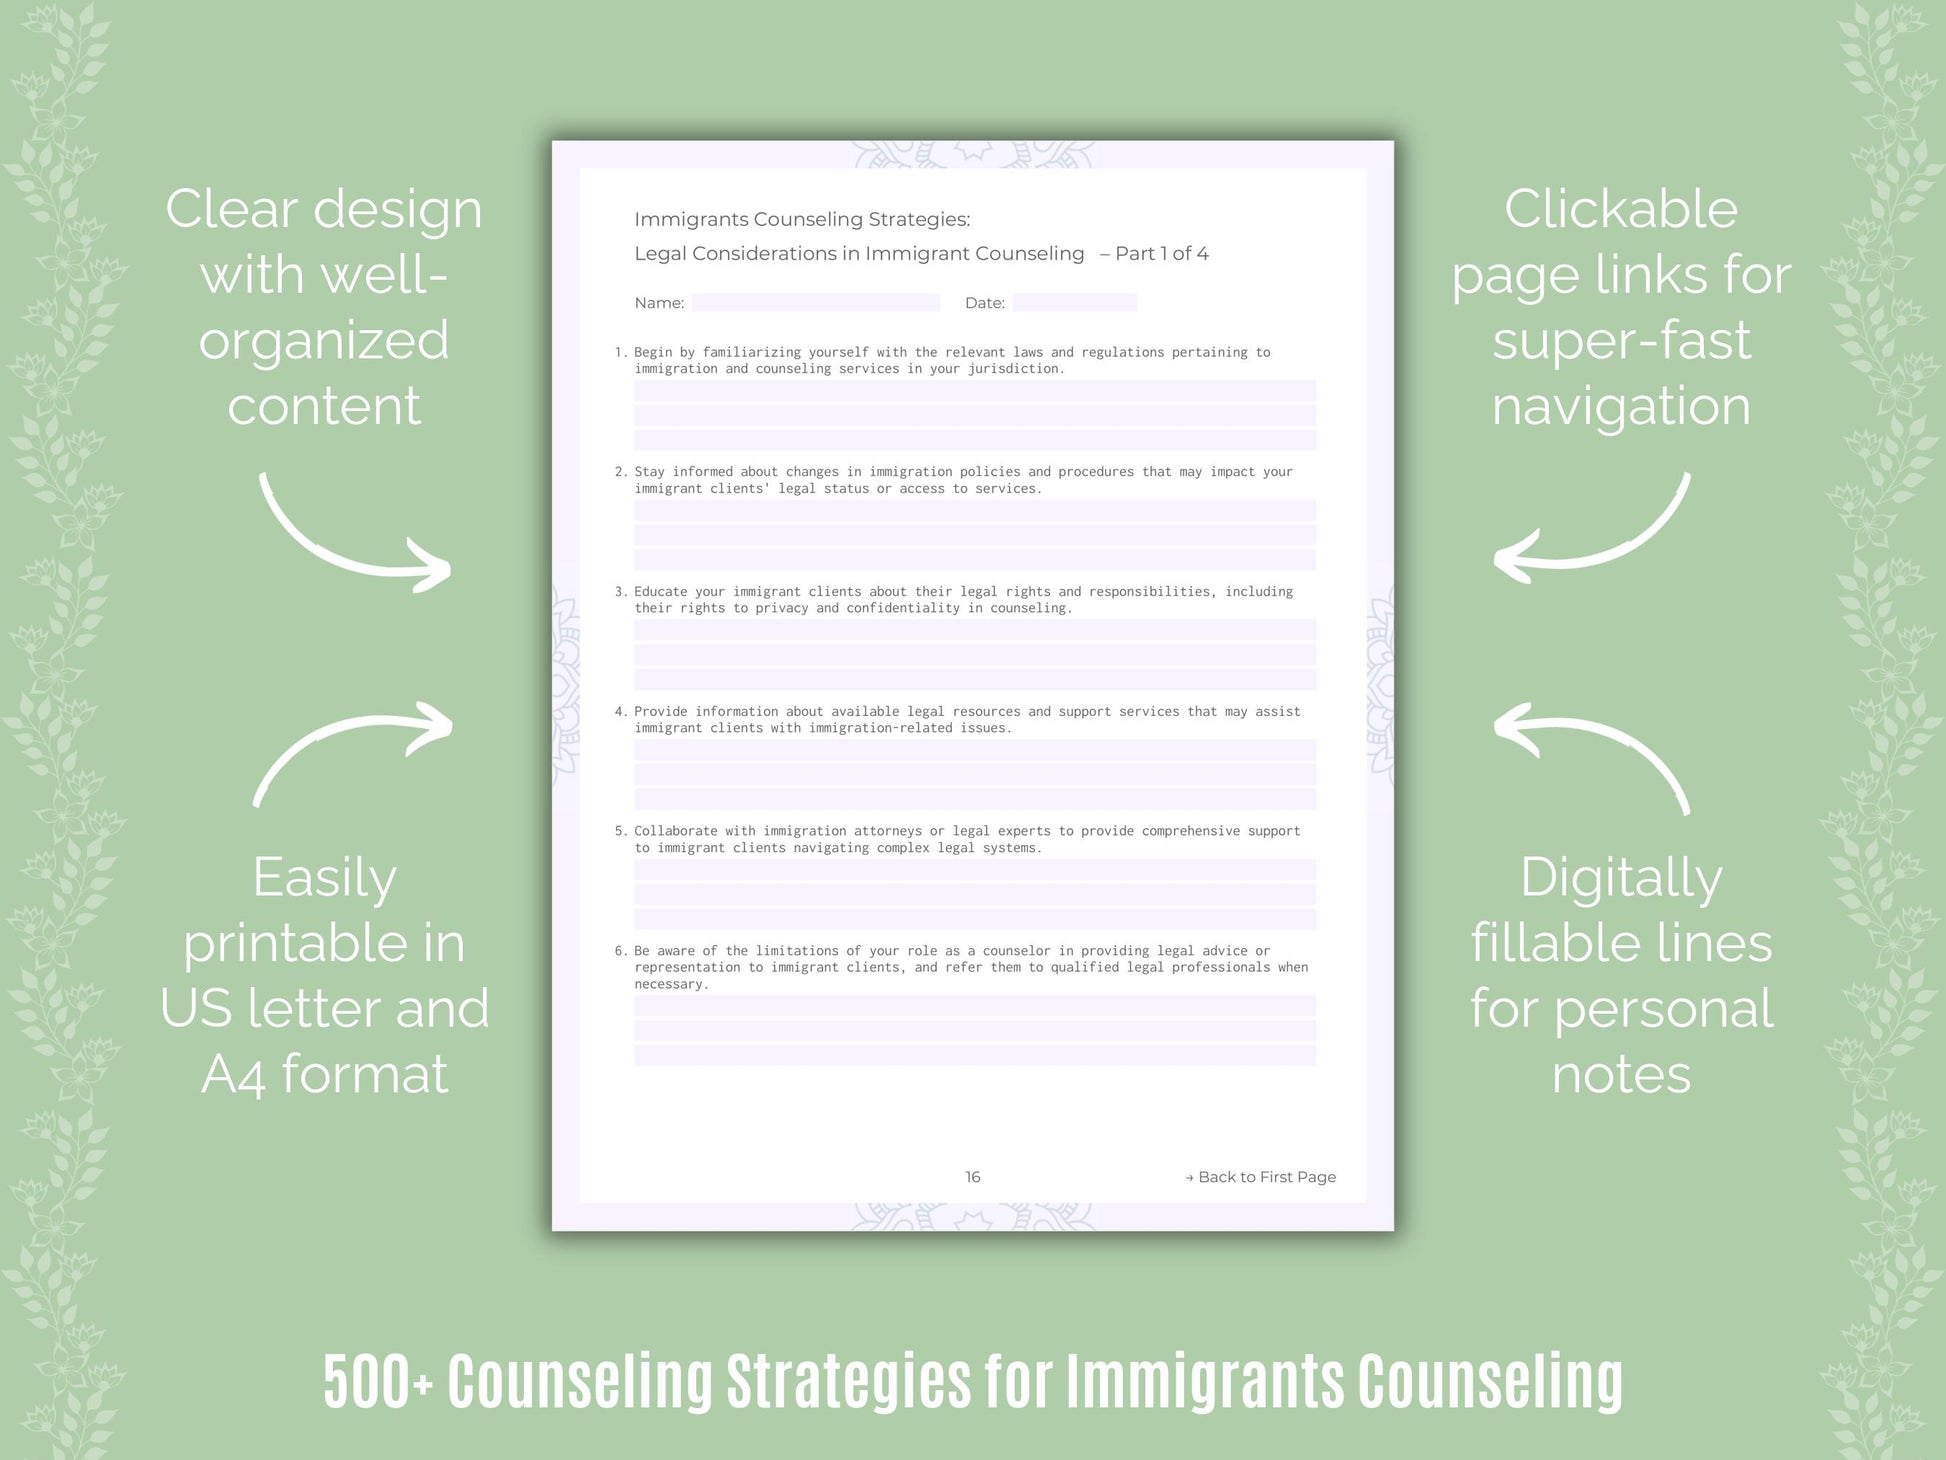 Immigrants Counseling Strategies